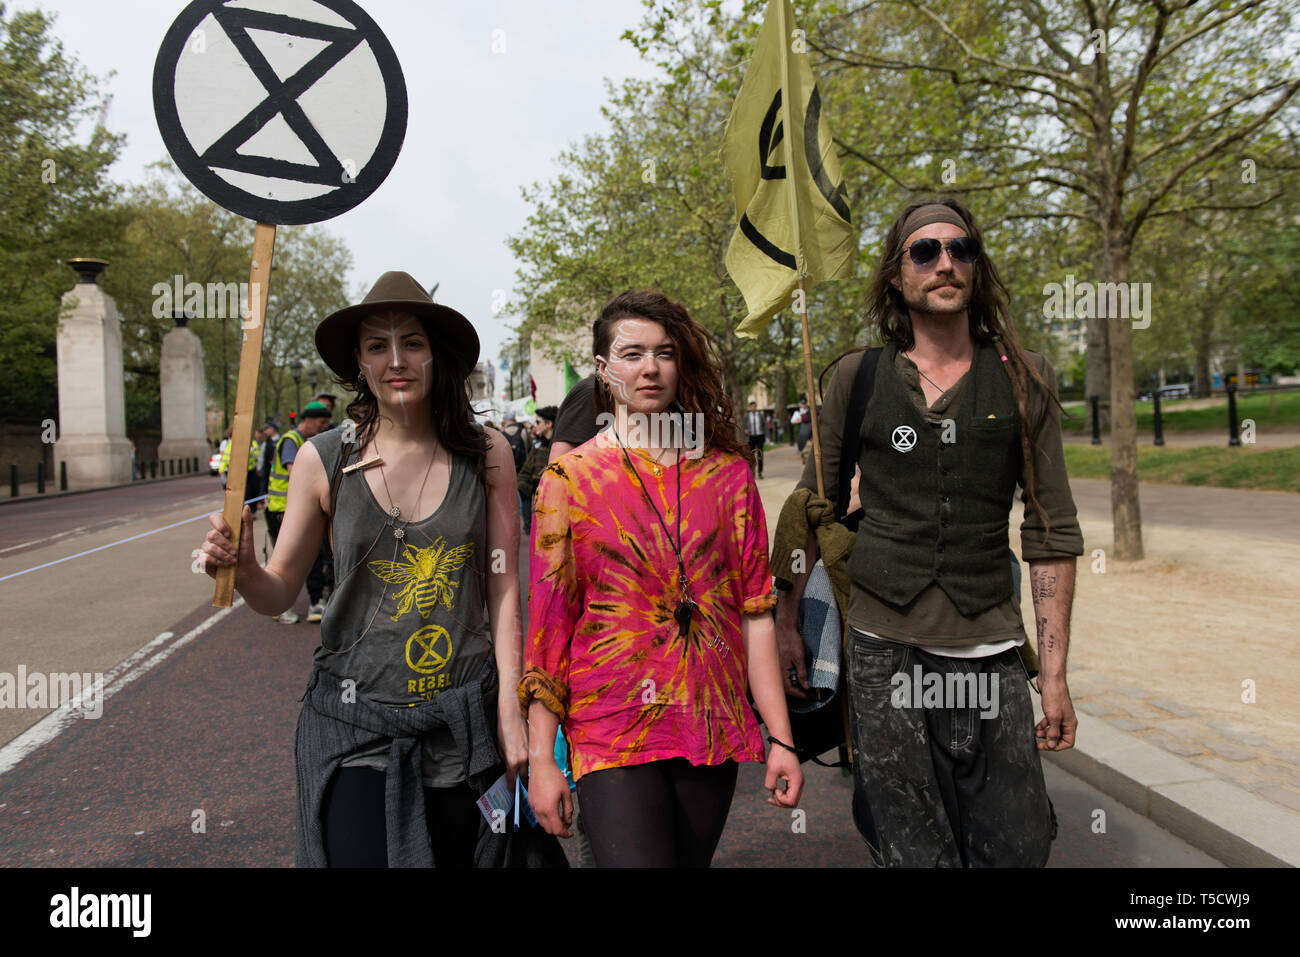 Climate Change protesters are seen holding a placard and a flag with the Extinction Rebellion logo during the Extinction Rebellion march in London.  Extinction Rebellion protesters march from Marble Arch to Parliament Square, attempting to deliver letters to their MPs. Extinction Rebellion activists were permitted to be in Parliament Square but not to enter Parliament. After several attempts to deliver the letters, the activists reached an agreement with MPs through the police. Ten activists were allowed to deliver the letters in the company of Baroness Jenny Jones (Green party). Philosopher a Stock Photo